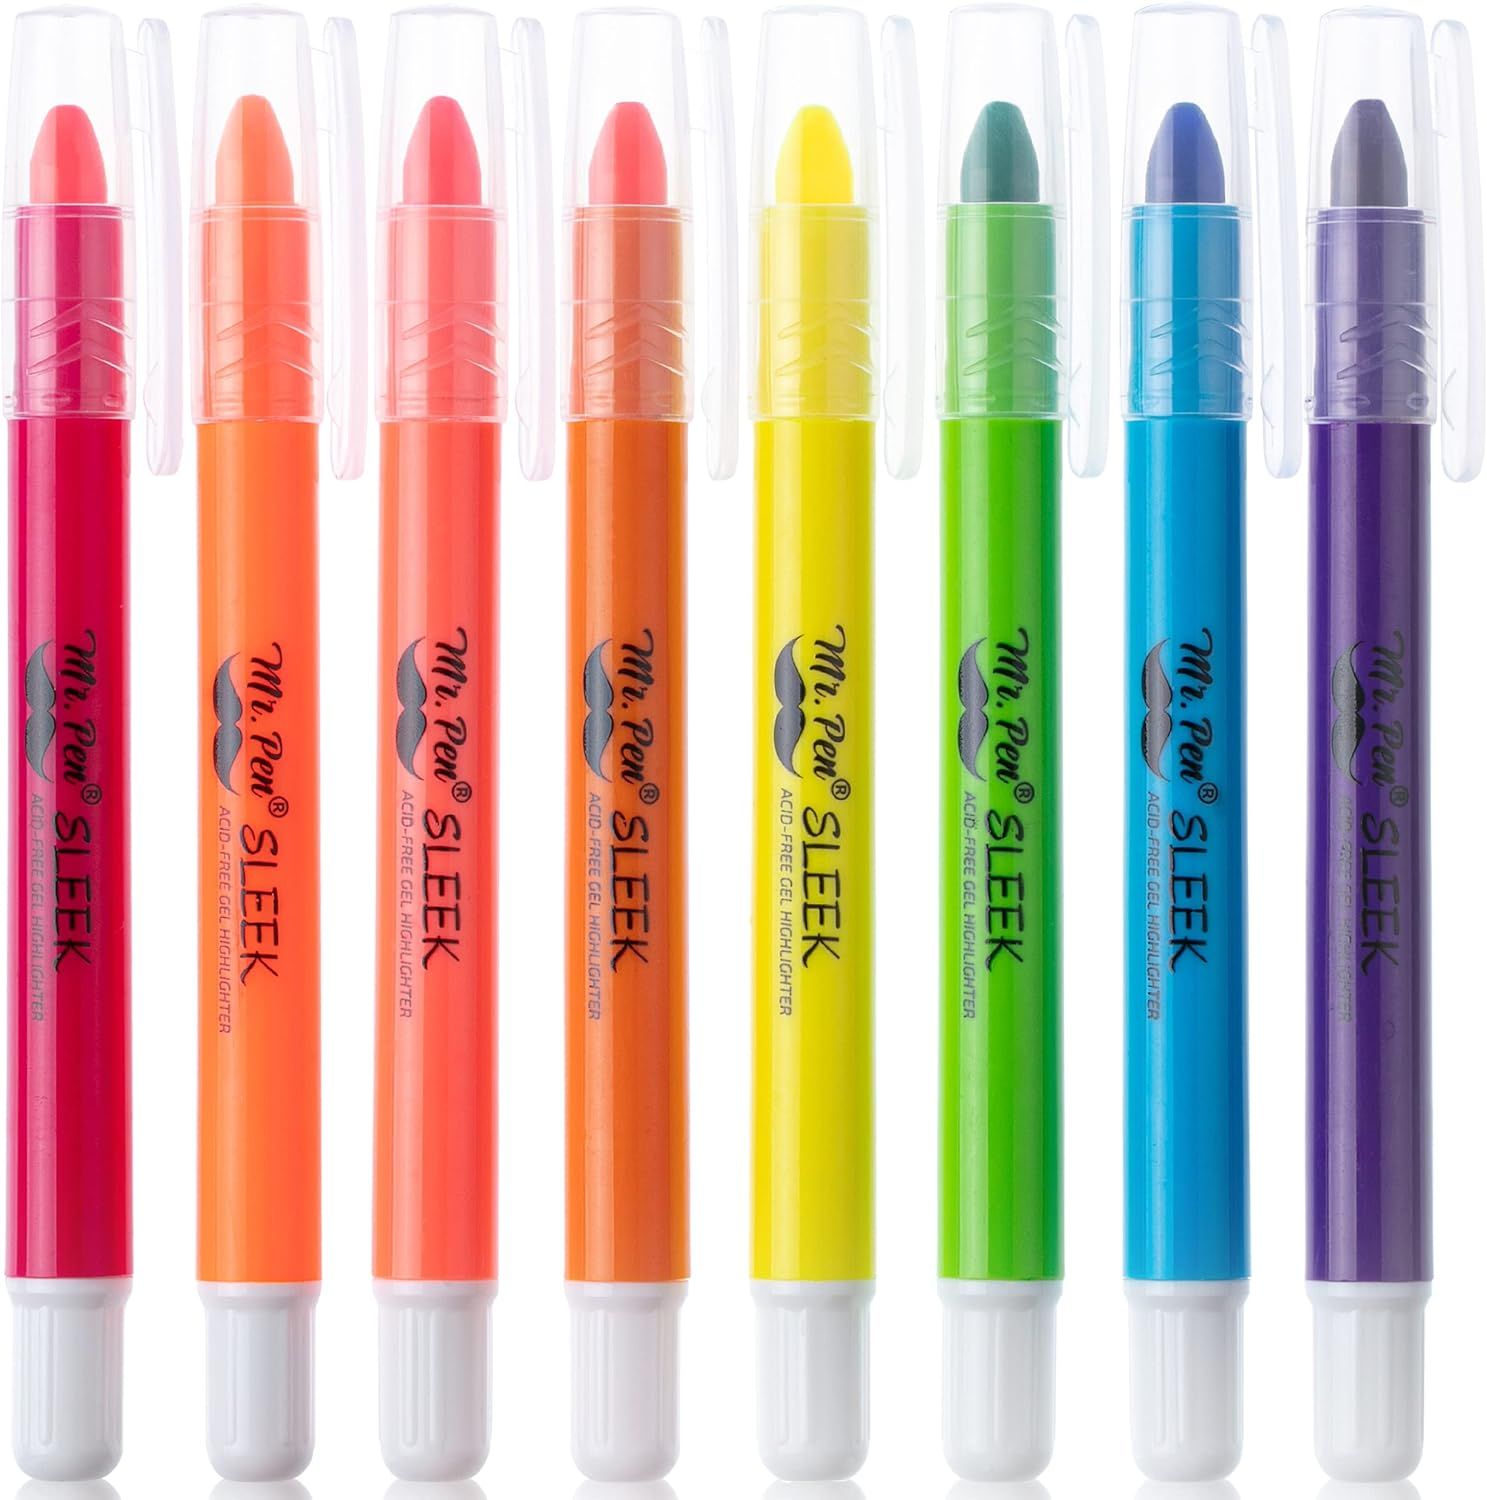 Mr. Pen No Bleed Gel Highlighter, Bible Highlighters, Assorted Colors, Pack of 8 | Amazon (US)